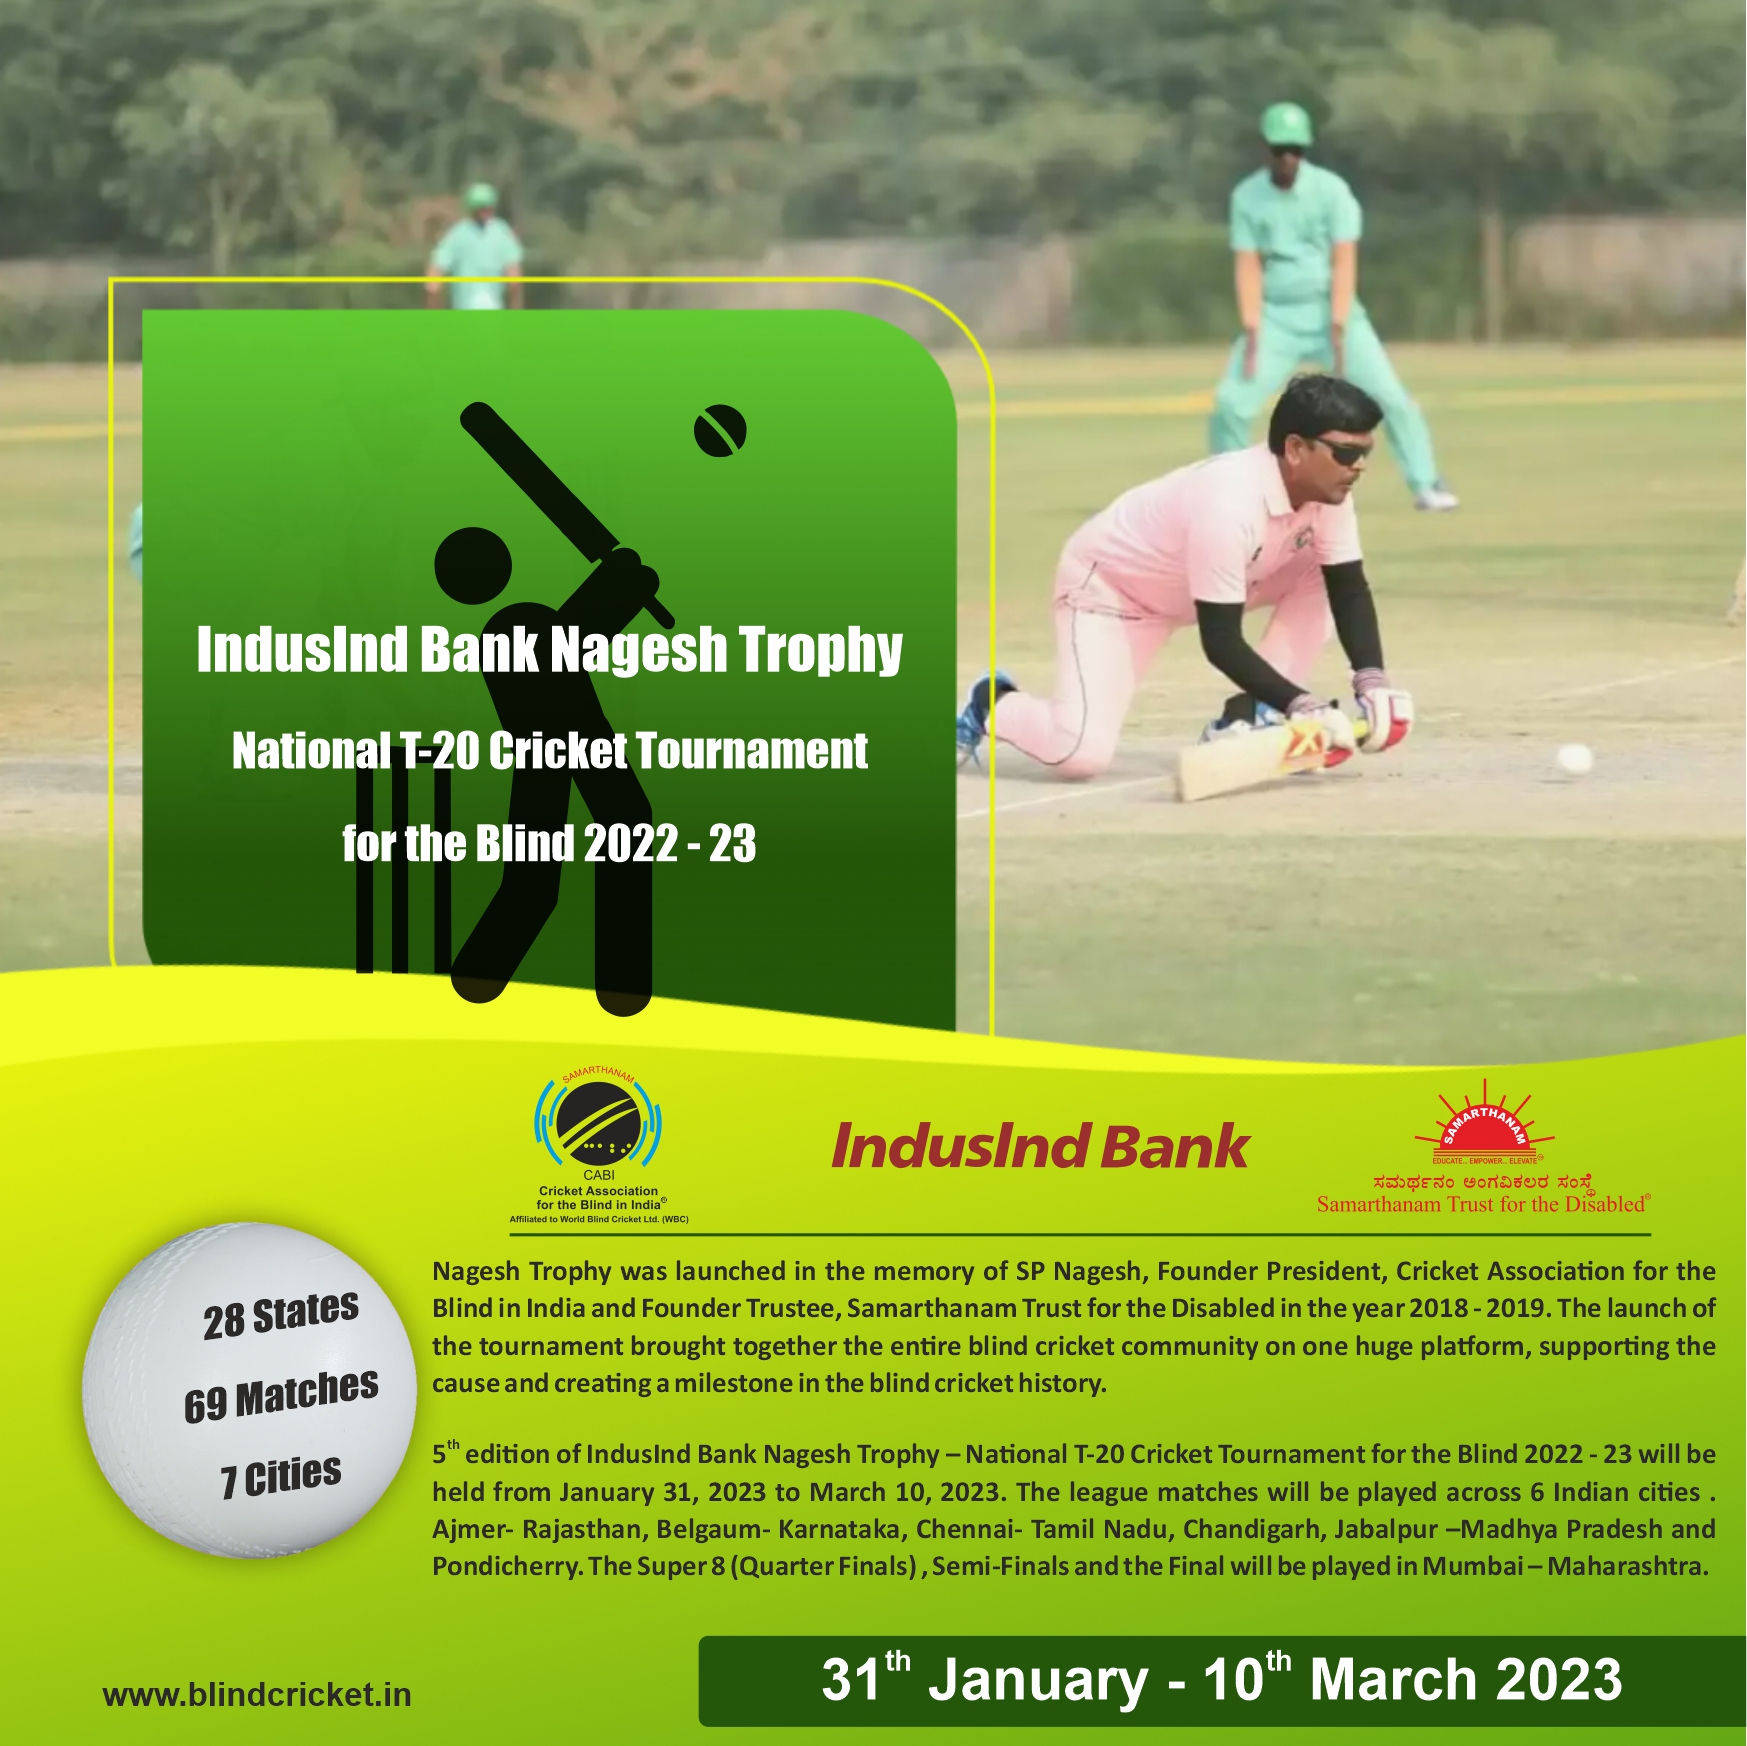 IndusInd Bank Nagesh Trophy National T20 Cricket Tournament for the Blind 2022 - 2023 will commence soon